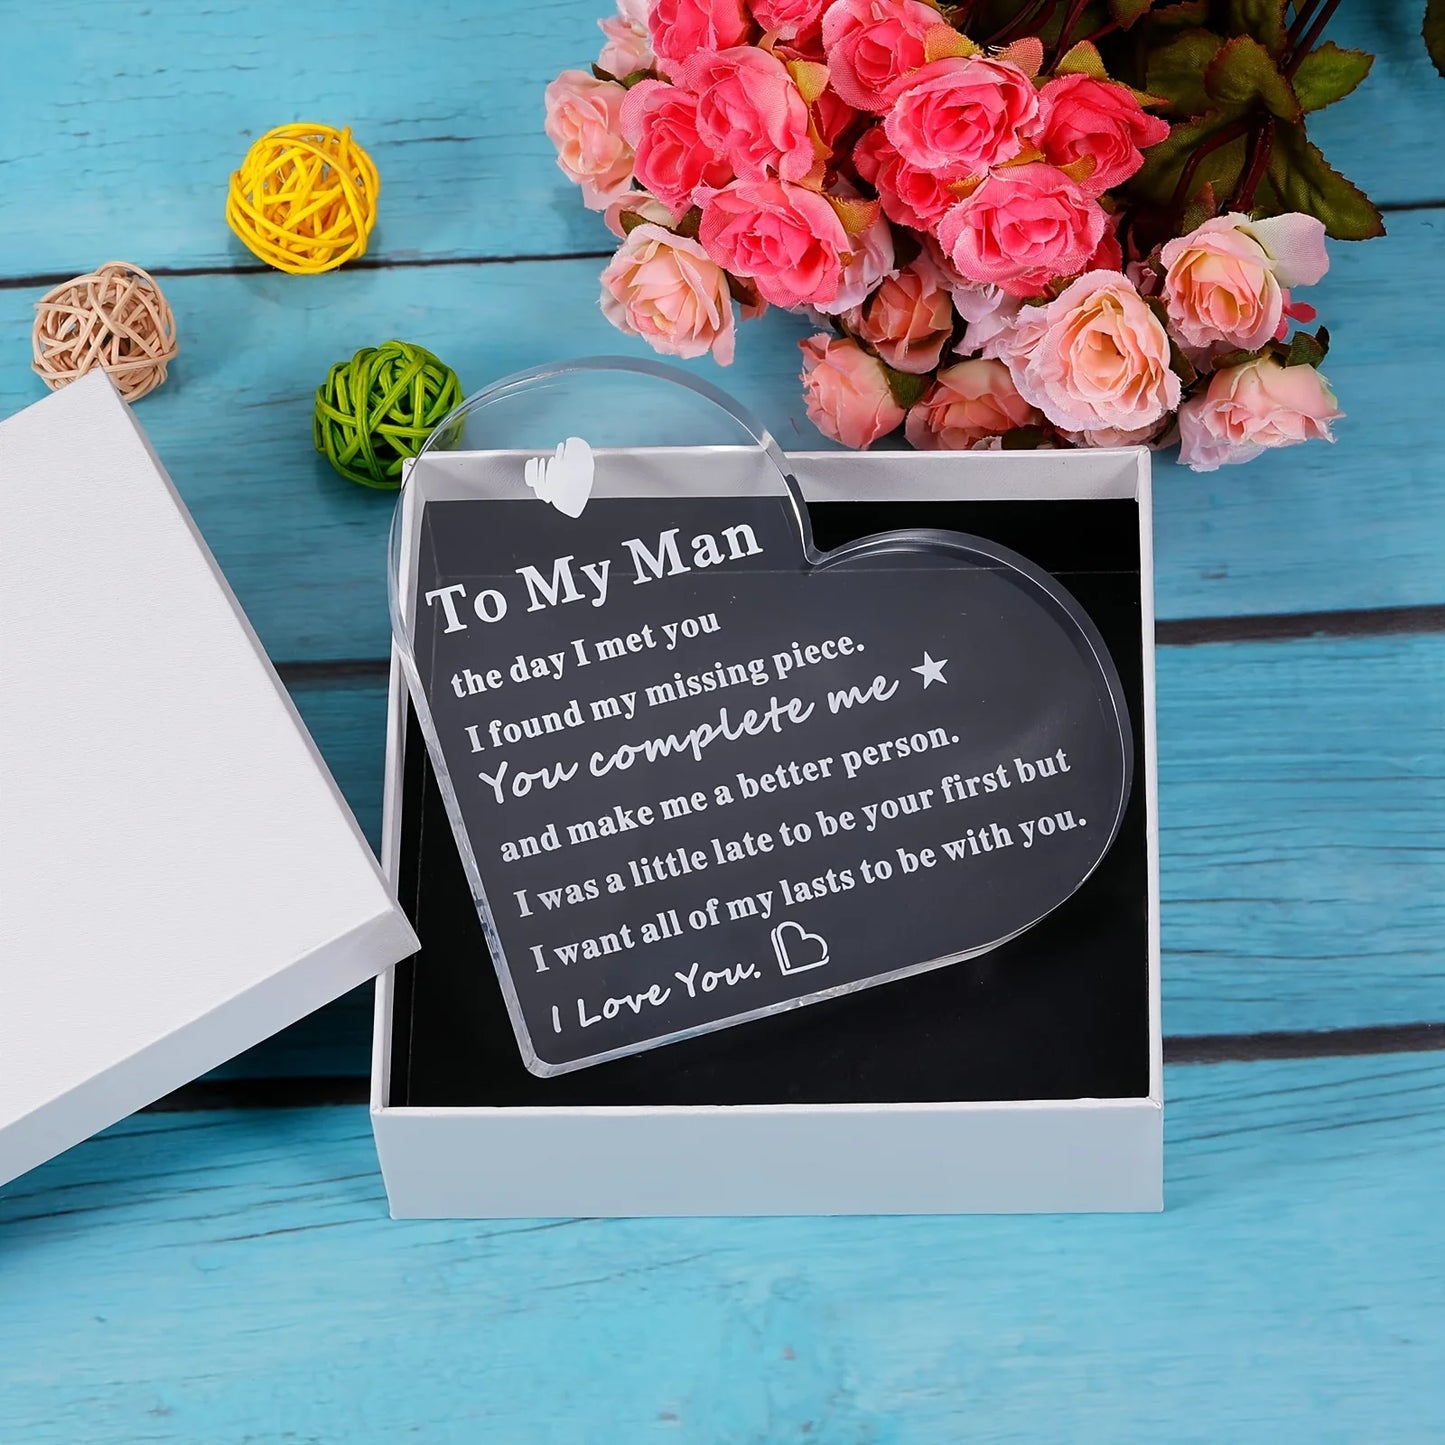 To My Man Acrylic Heart Shaped Plaque